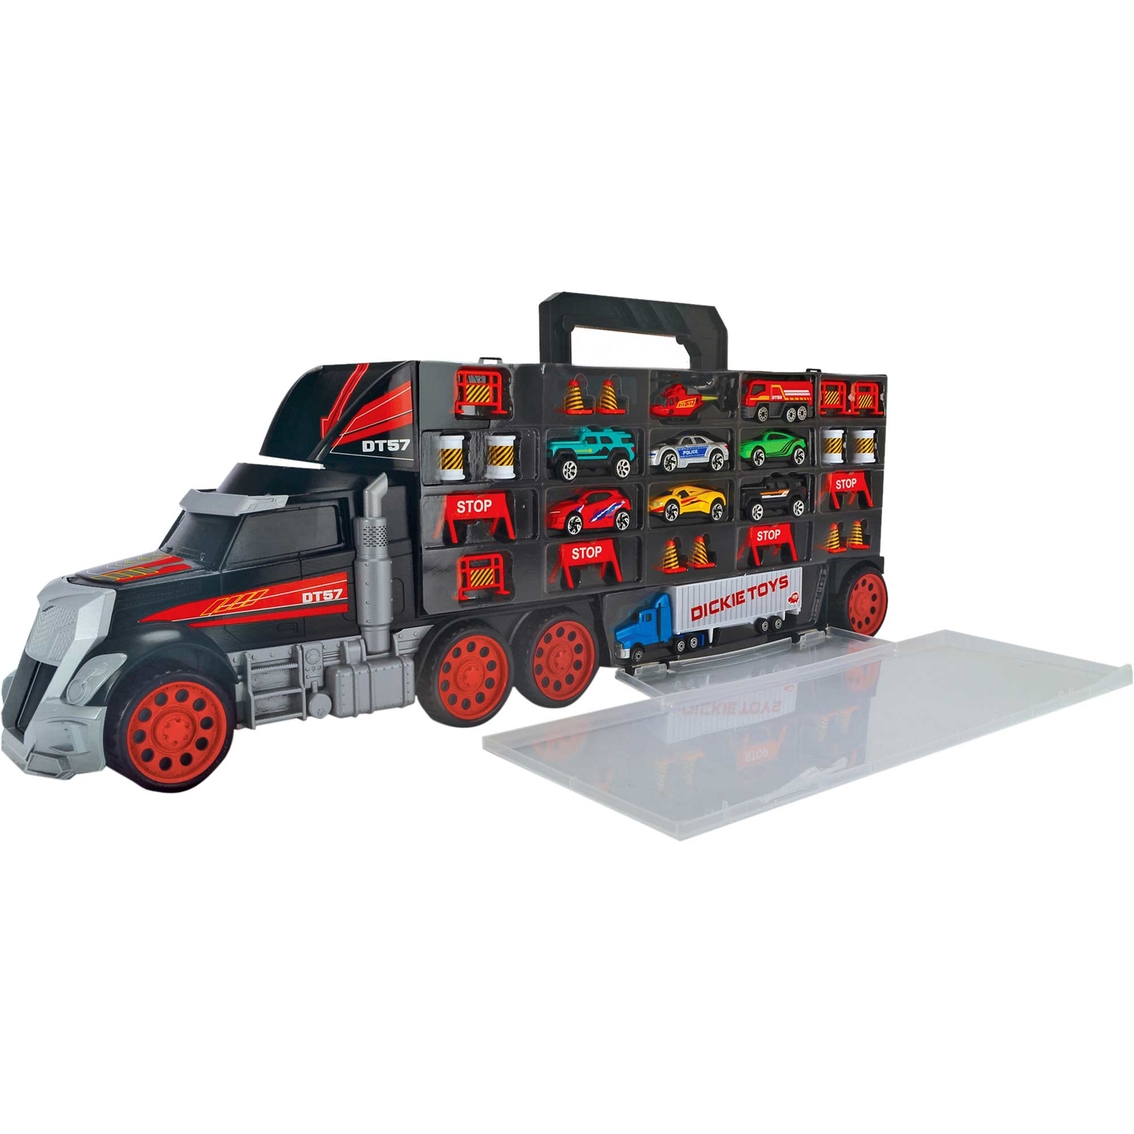 Dickie Toys Truck Carry Case Playset, Racetracks & Playsets, Baby & Toys